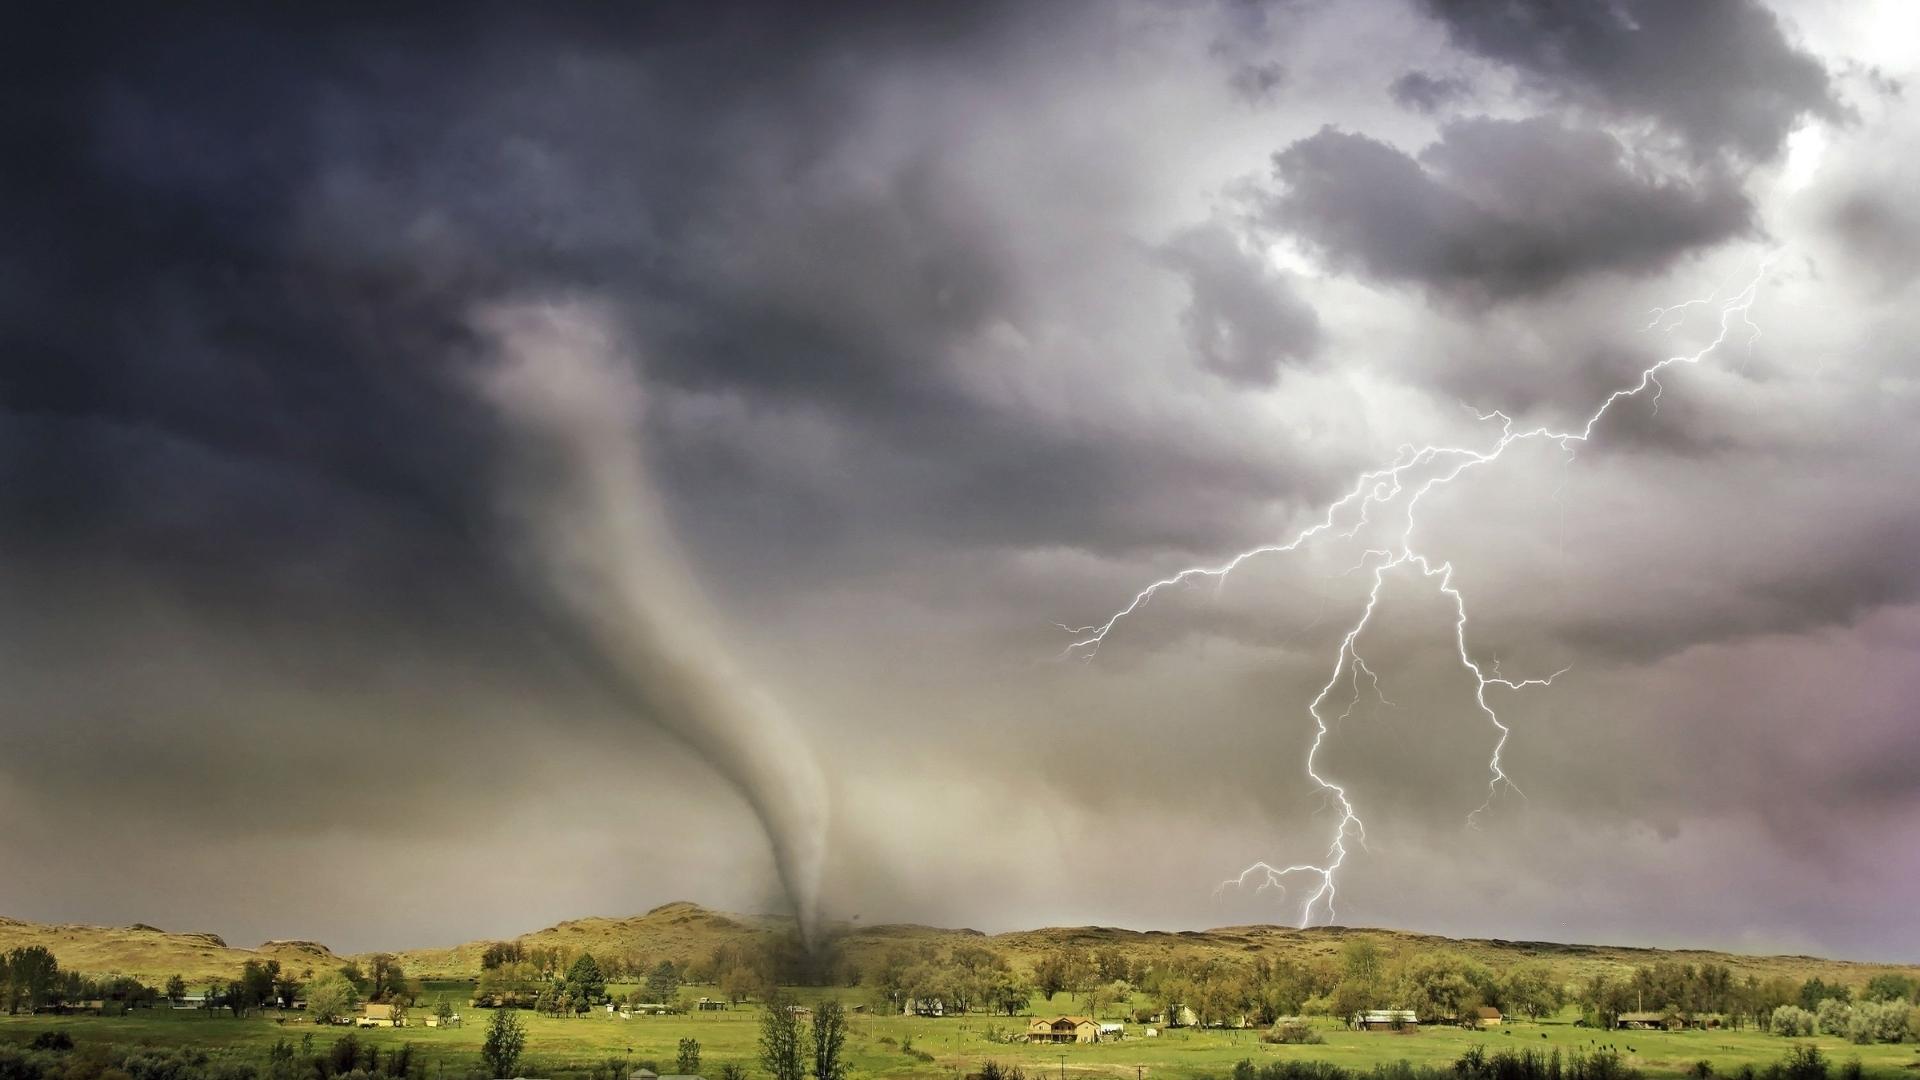 RV living tips are shown in this photo of a tornado and lightning in the distance